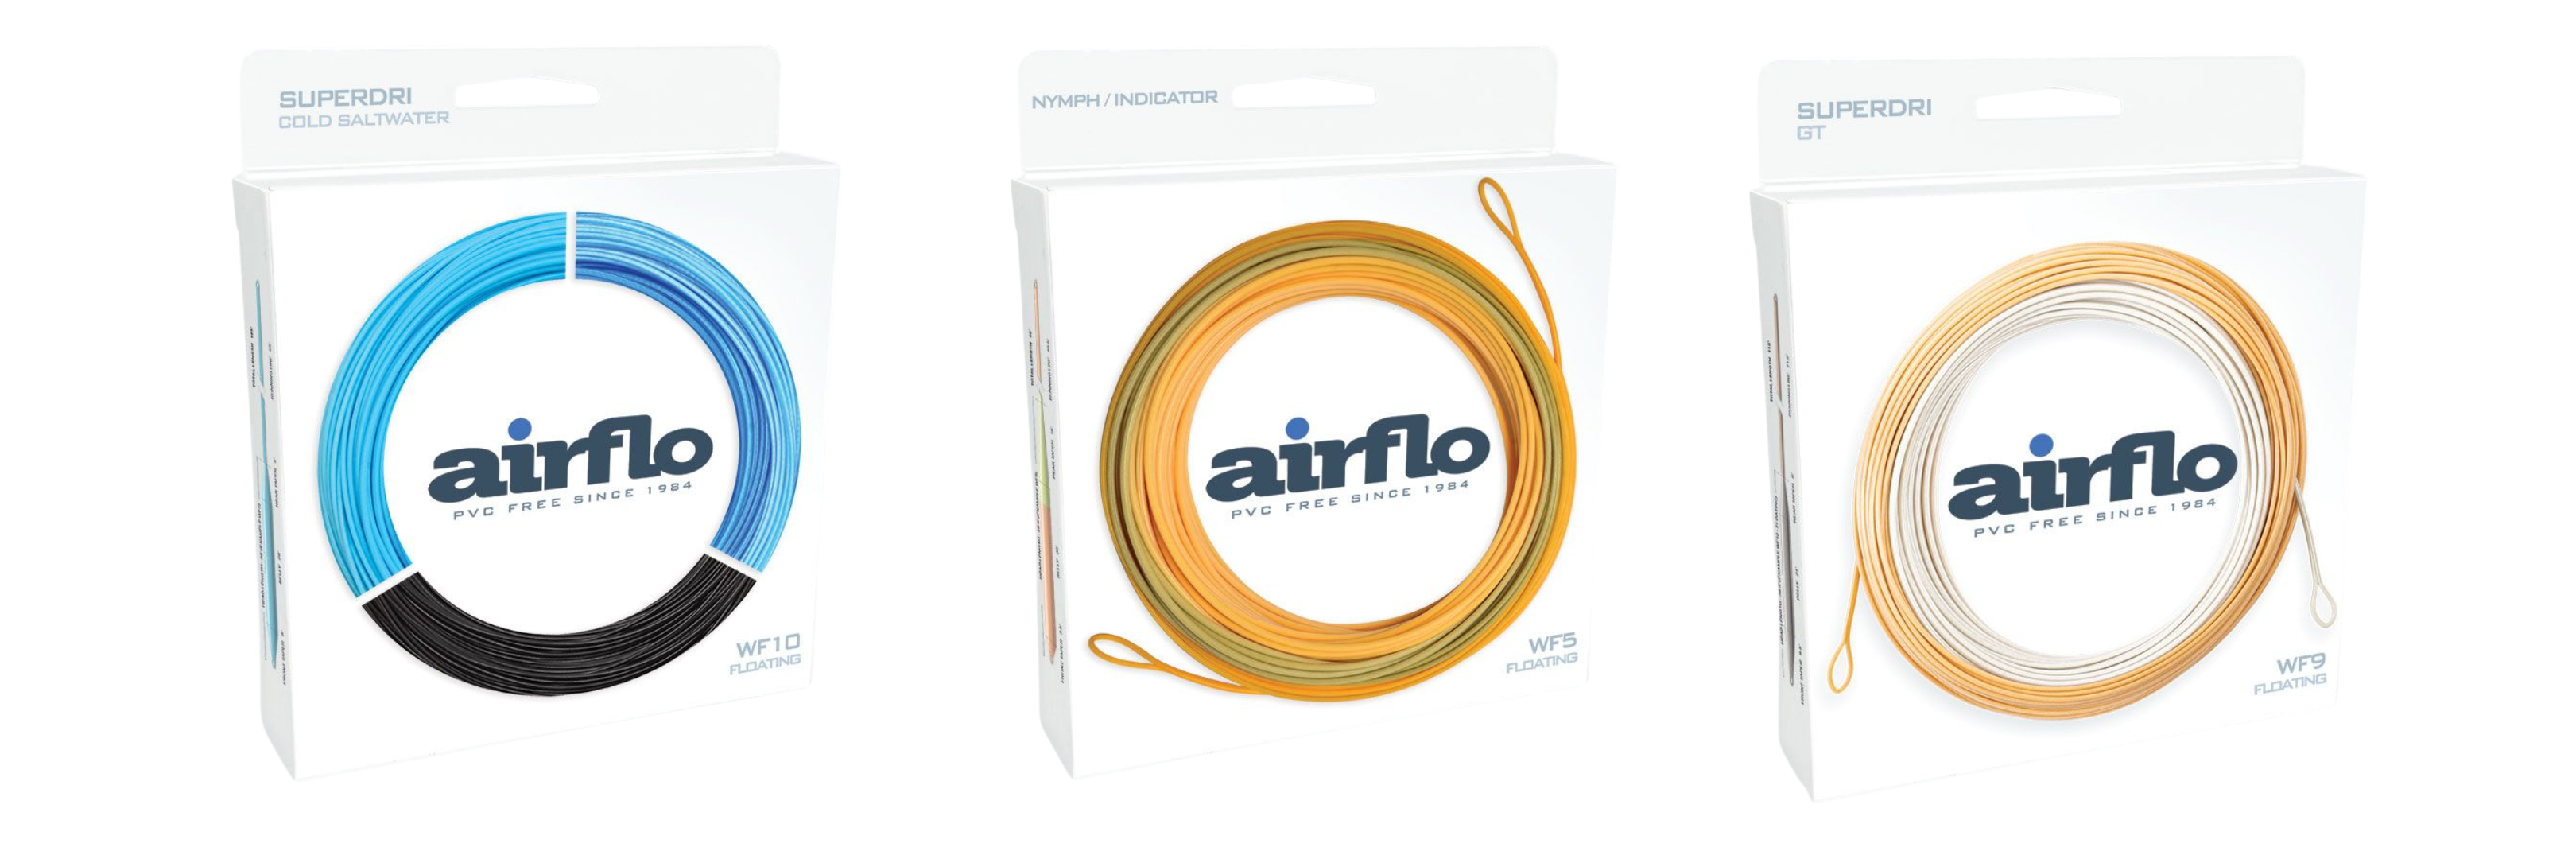 Shop Airflo Fly Lines: Streamer Max, Superflo, and More